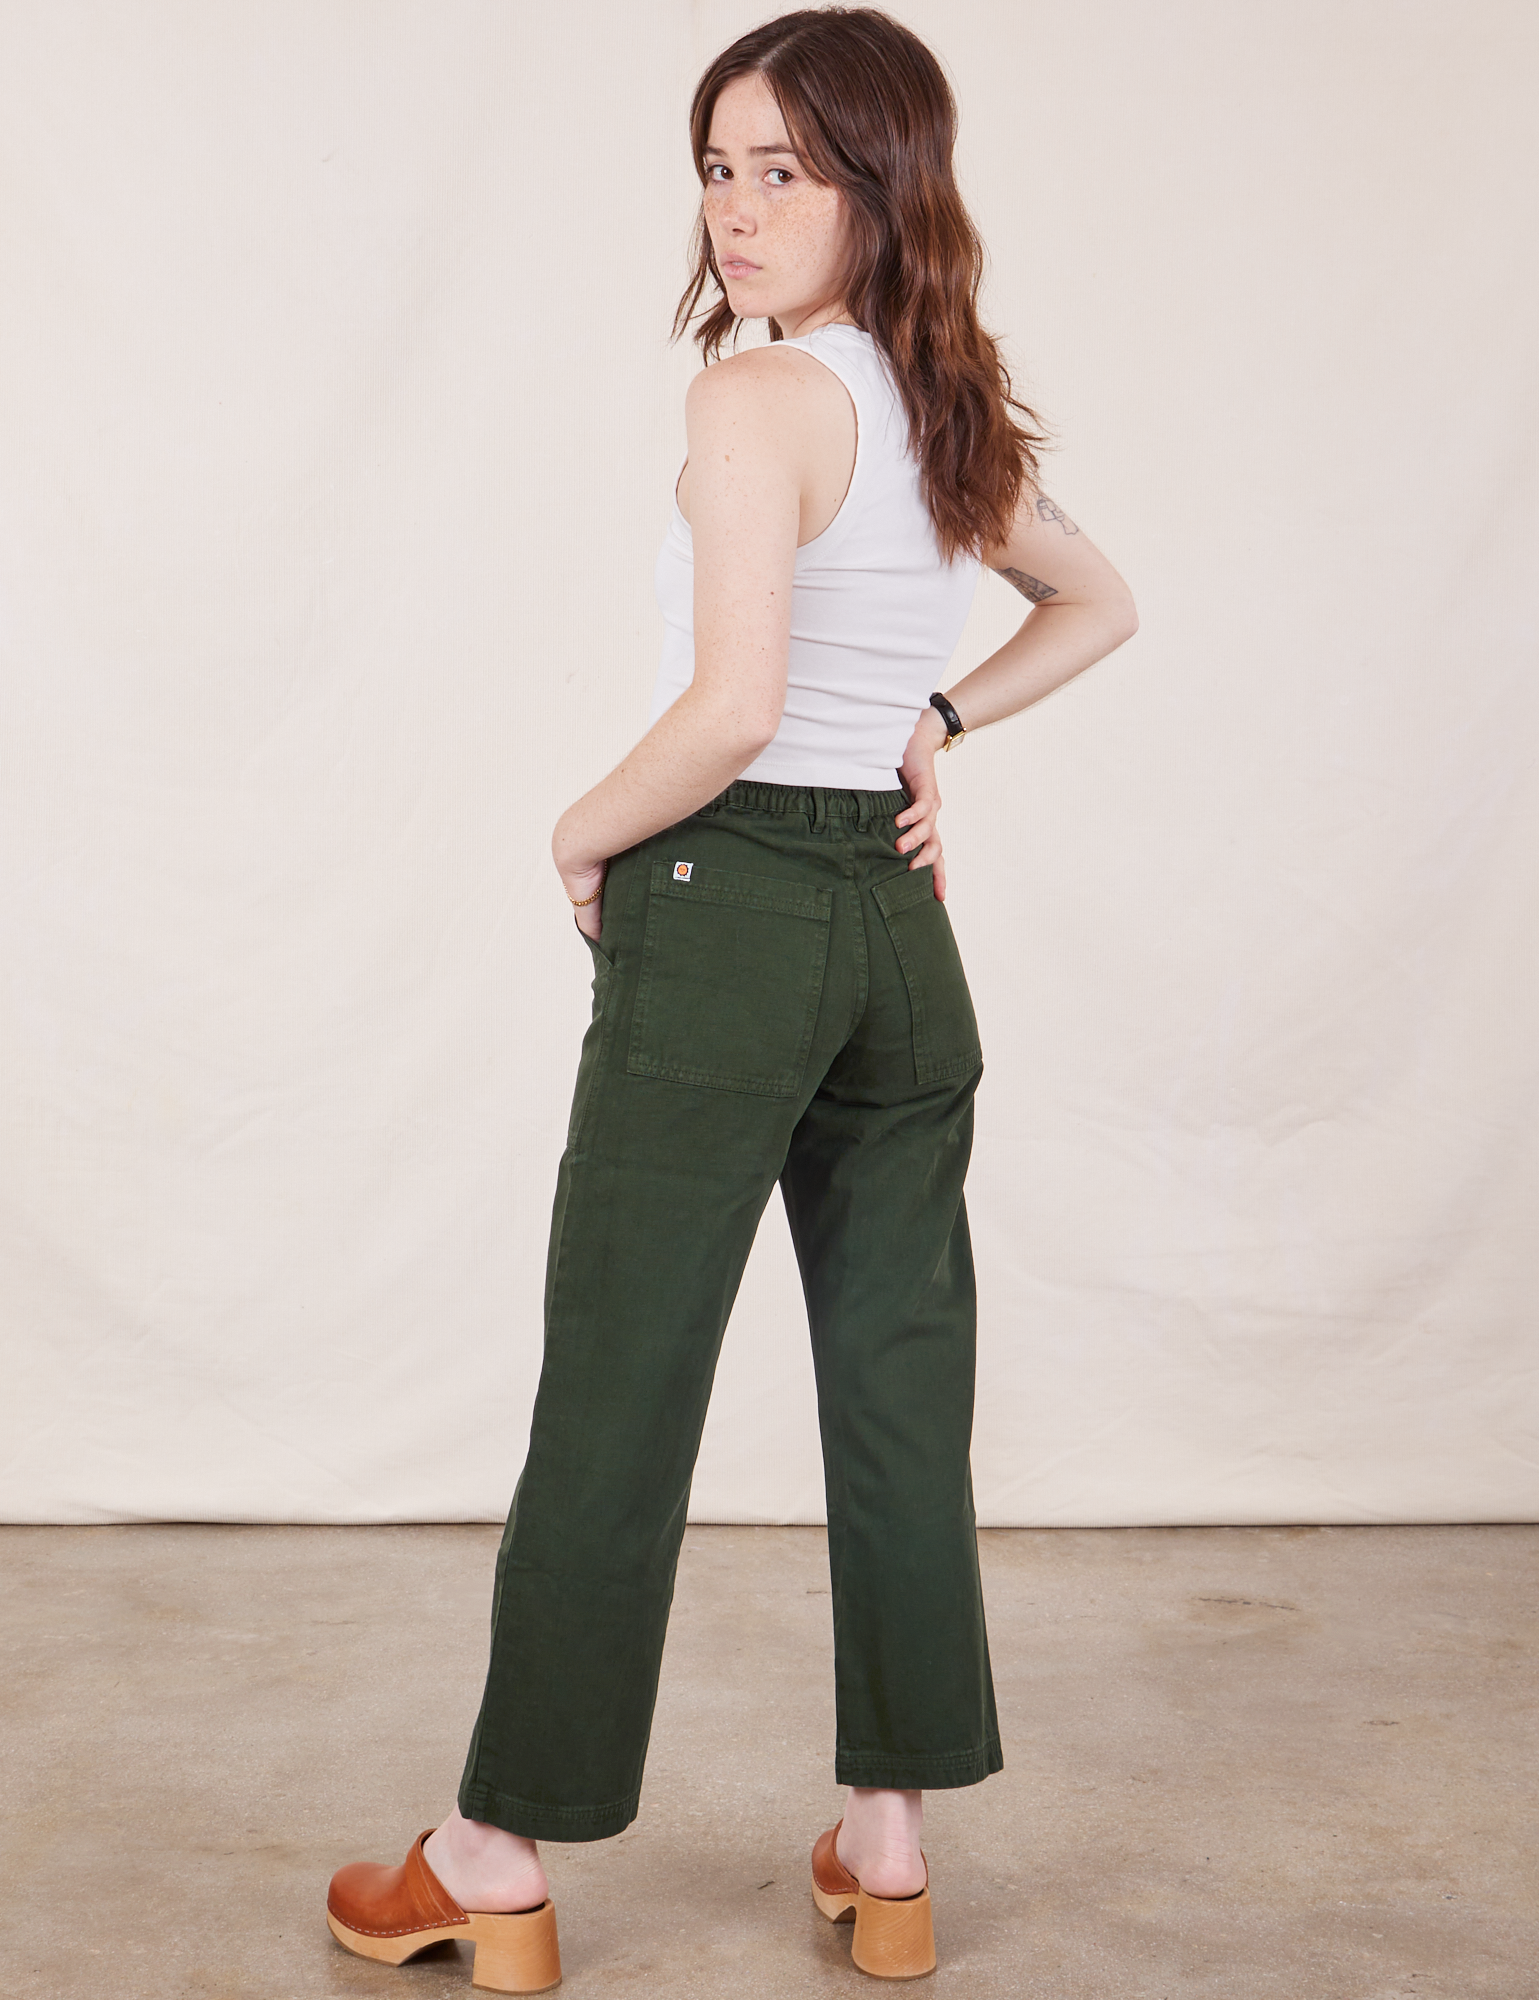 Back view of Petite Work Pants in Swamp Green and vintage tee off-white Cropped Tank